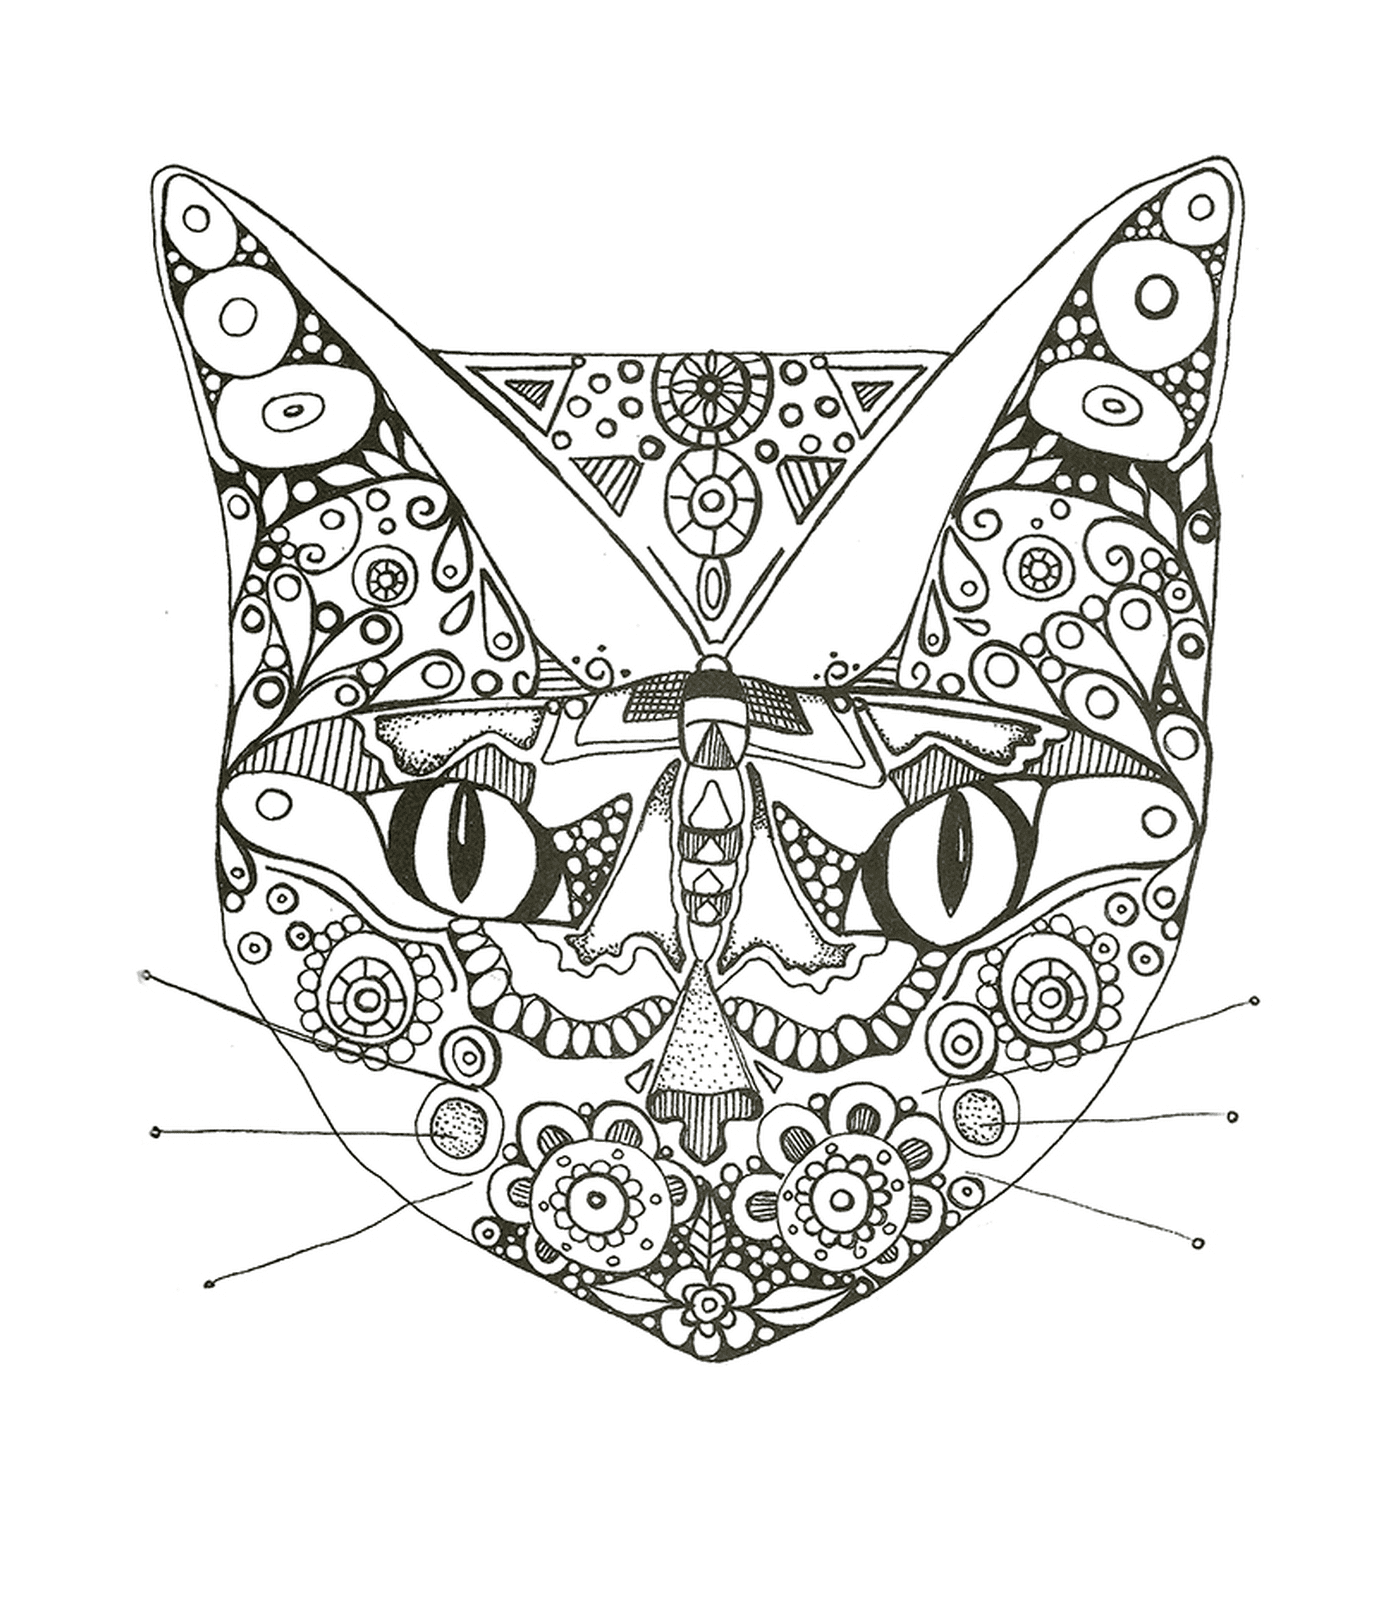  Cat face in drawing 